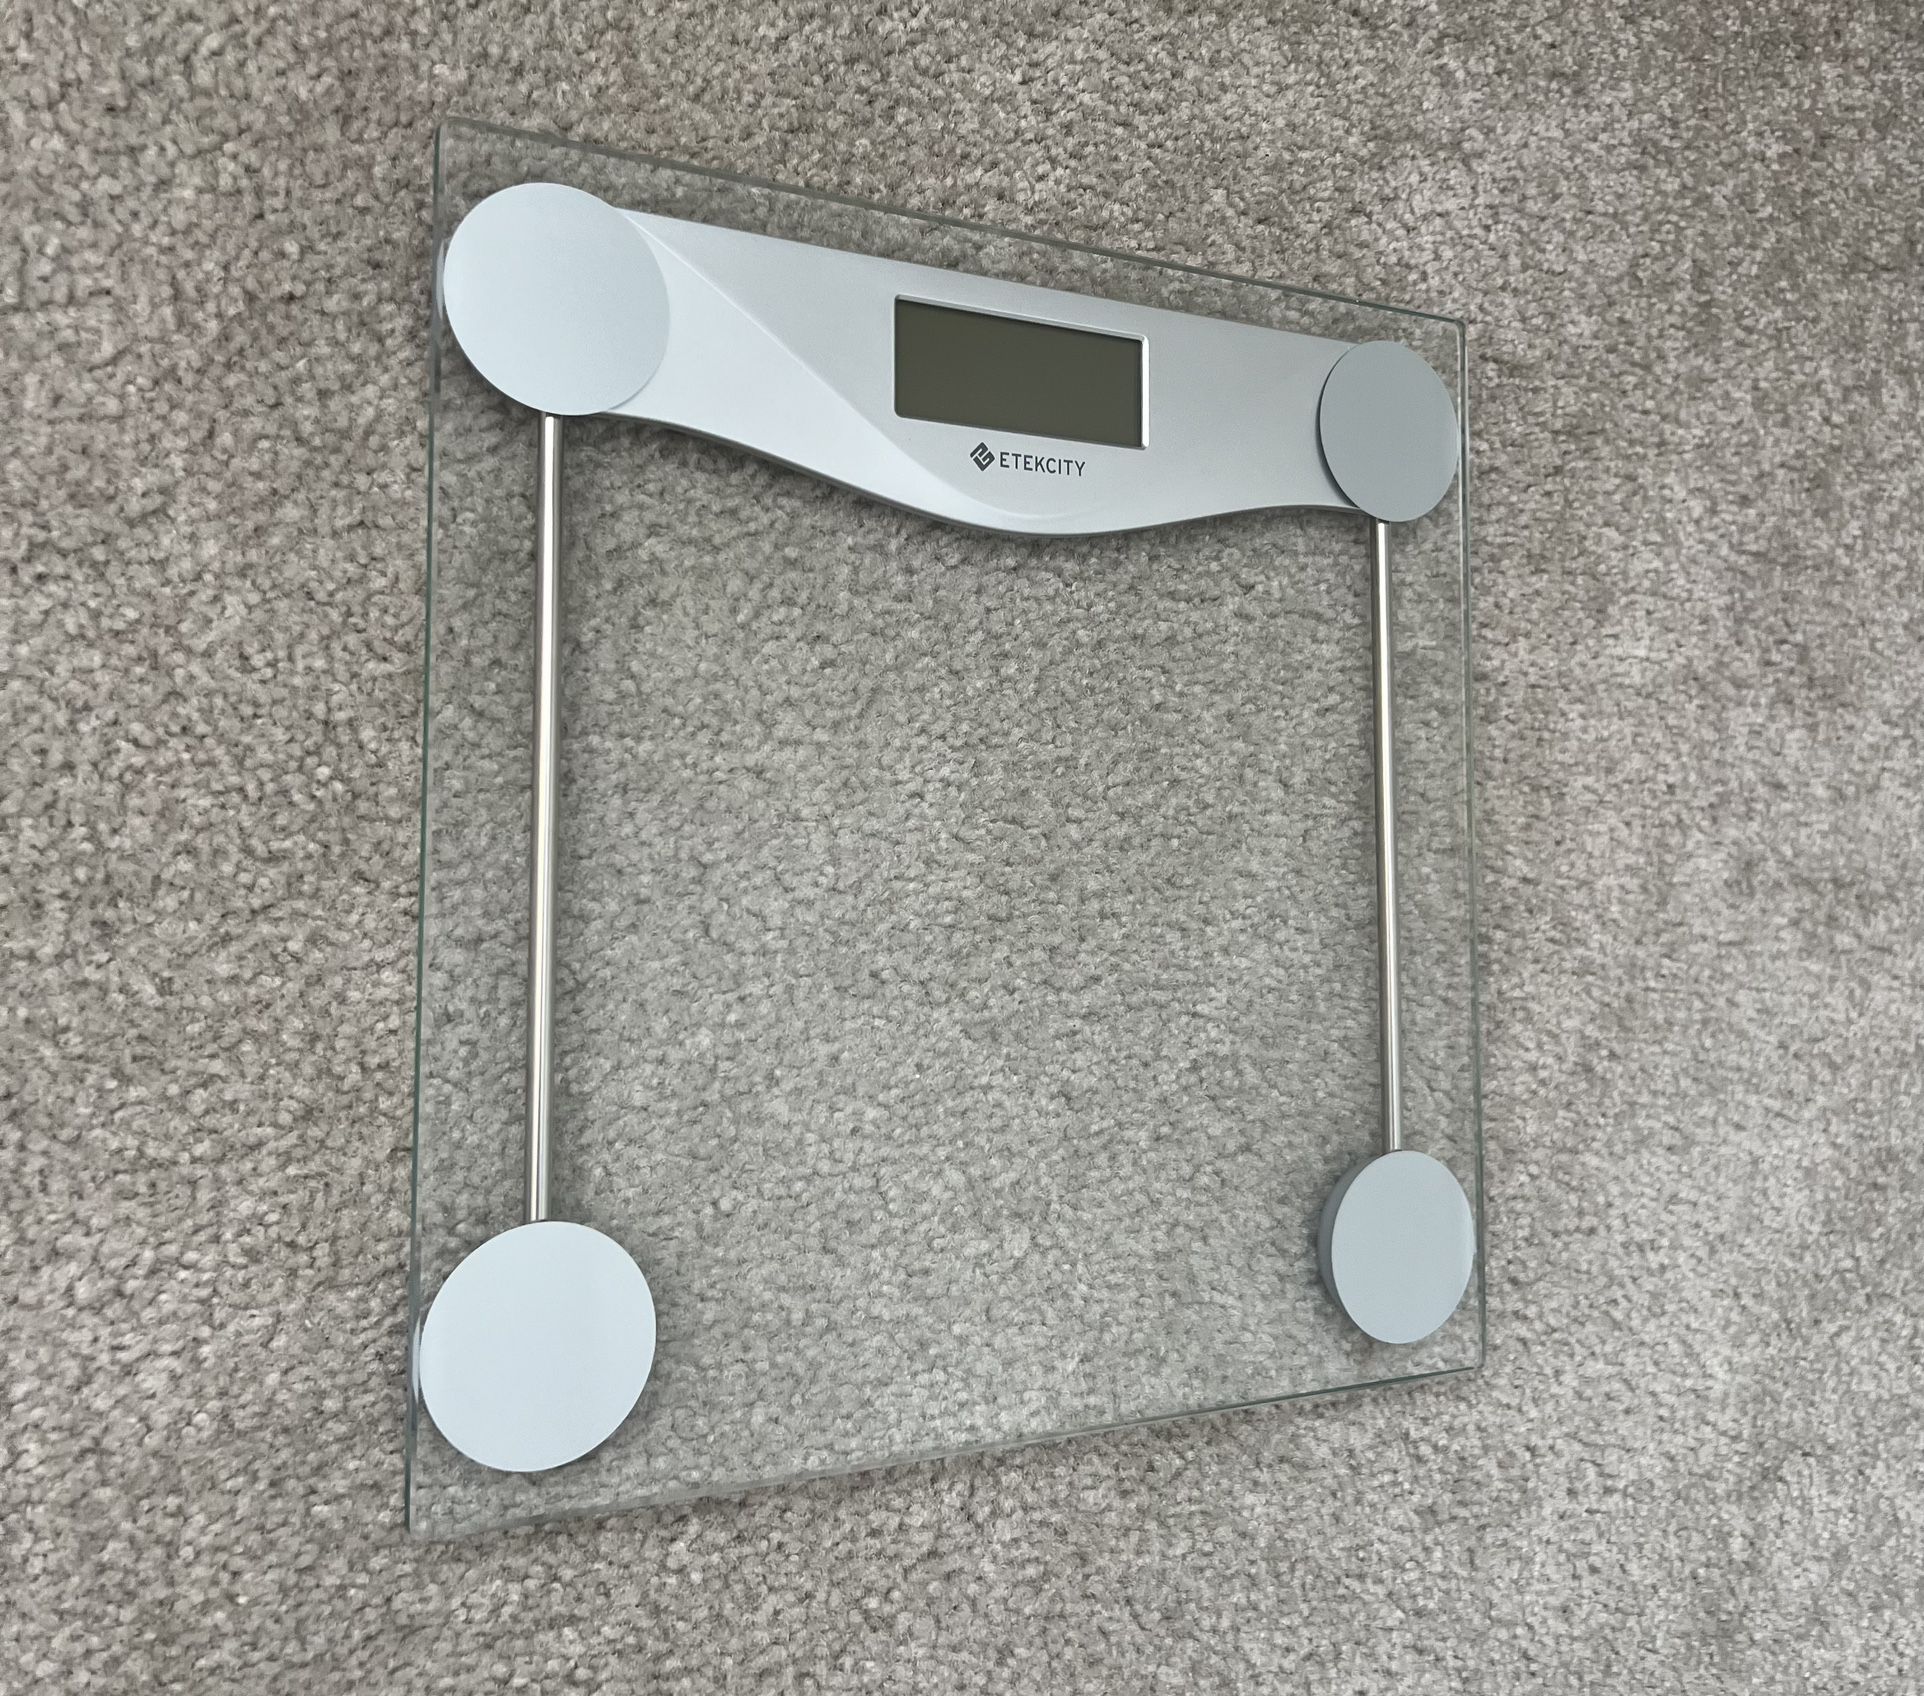 Bathroom Scale for Body Weight - Brand New